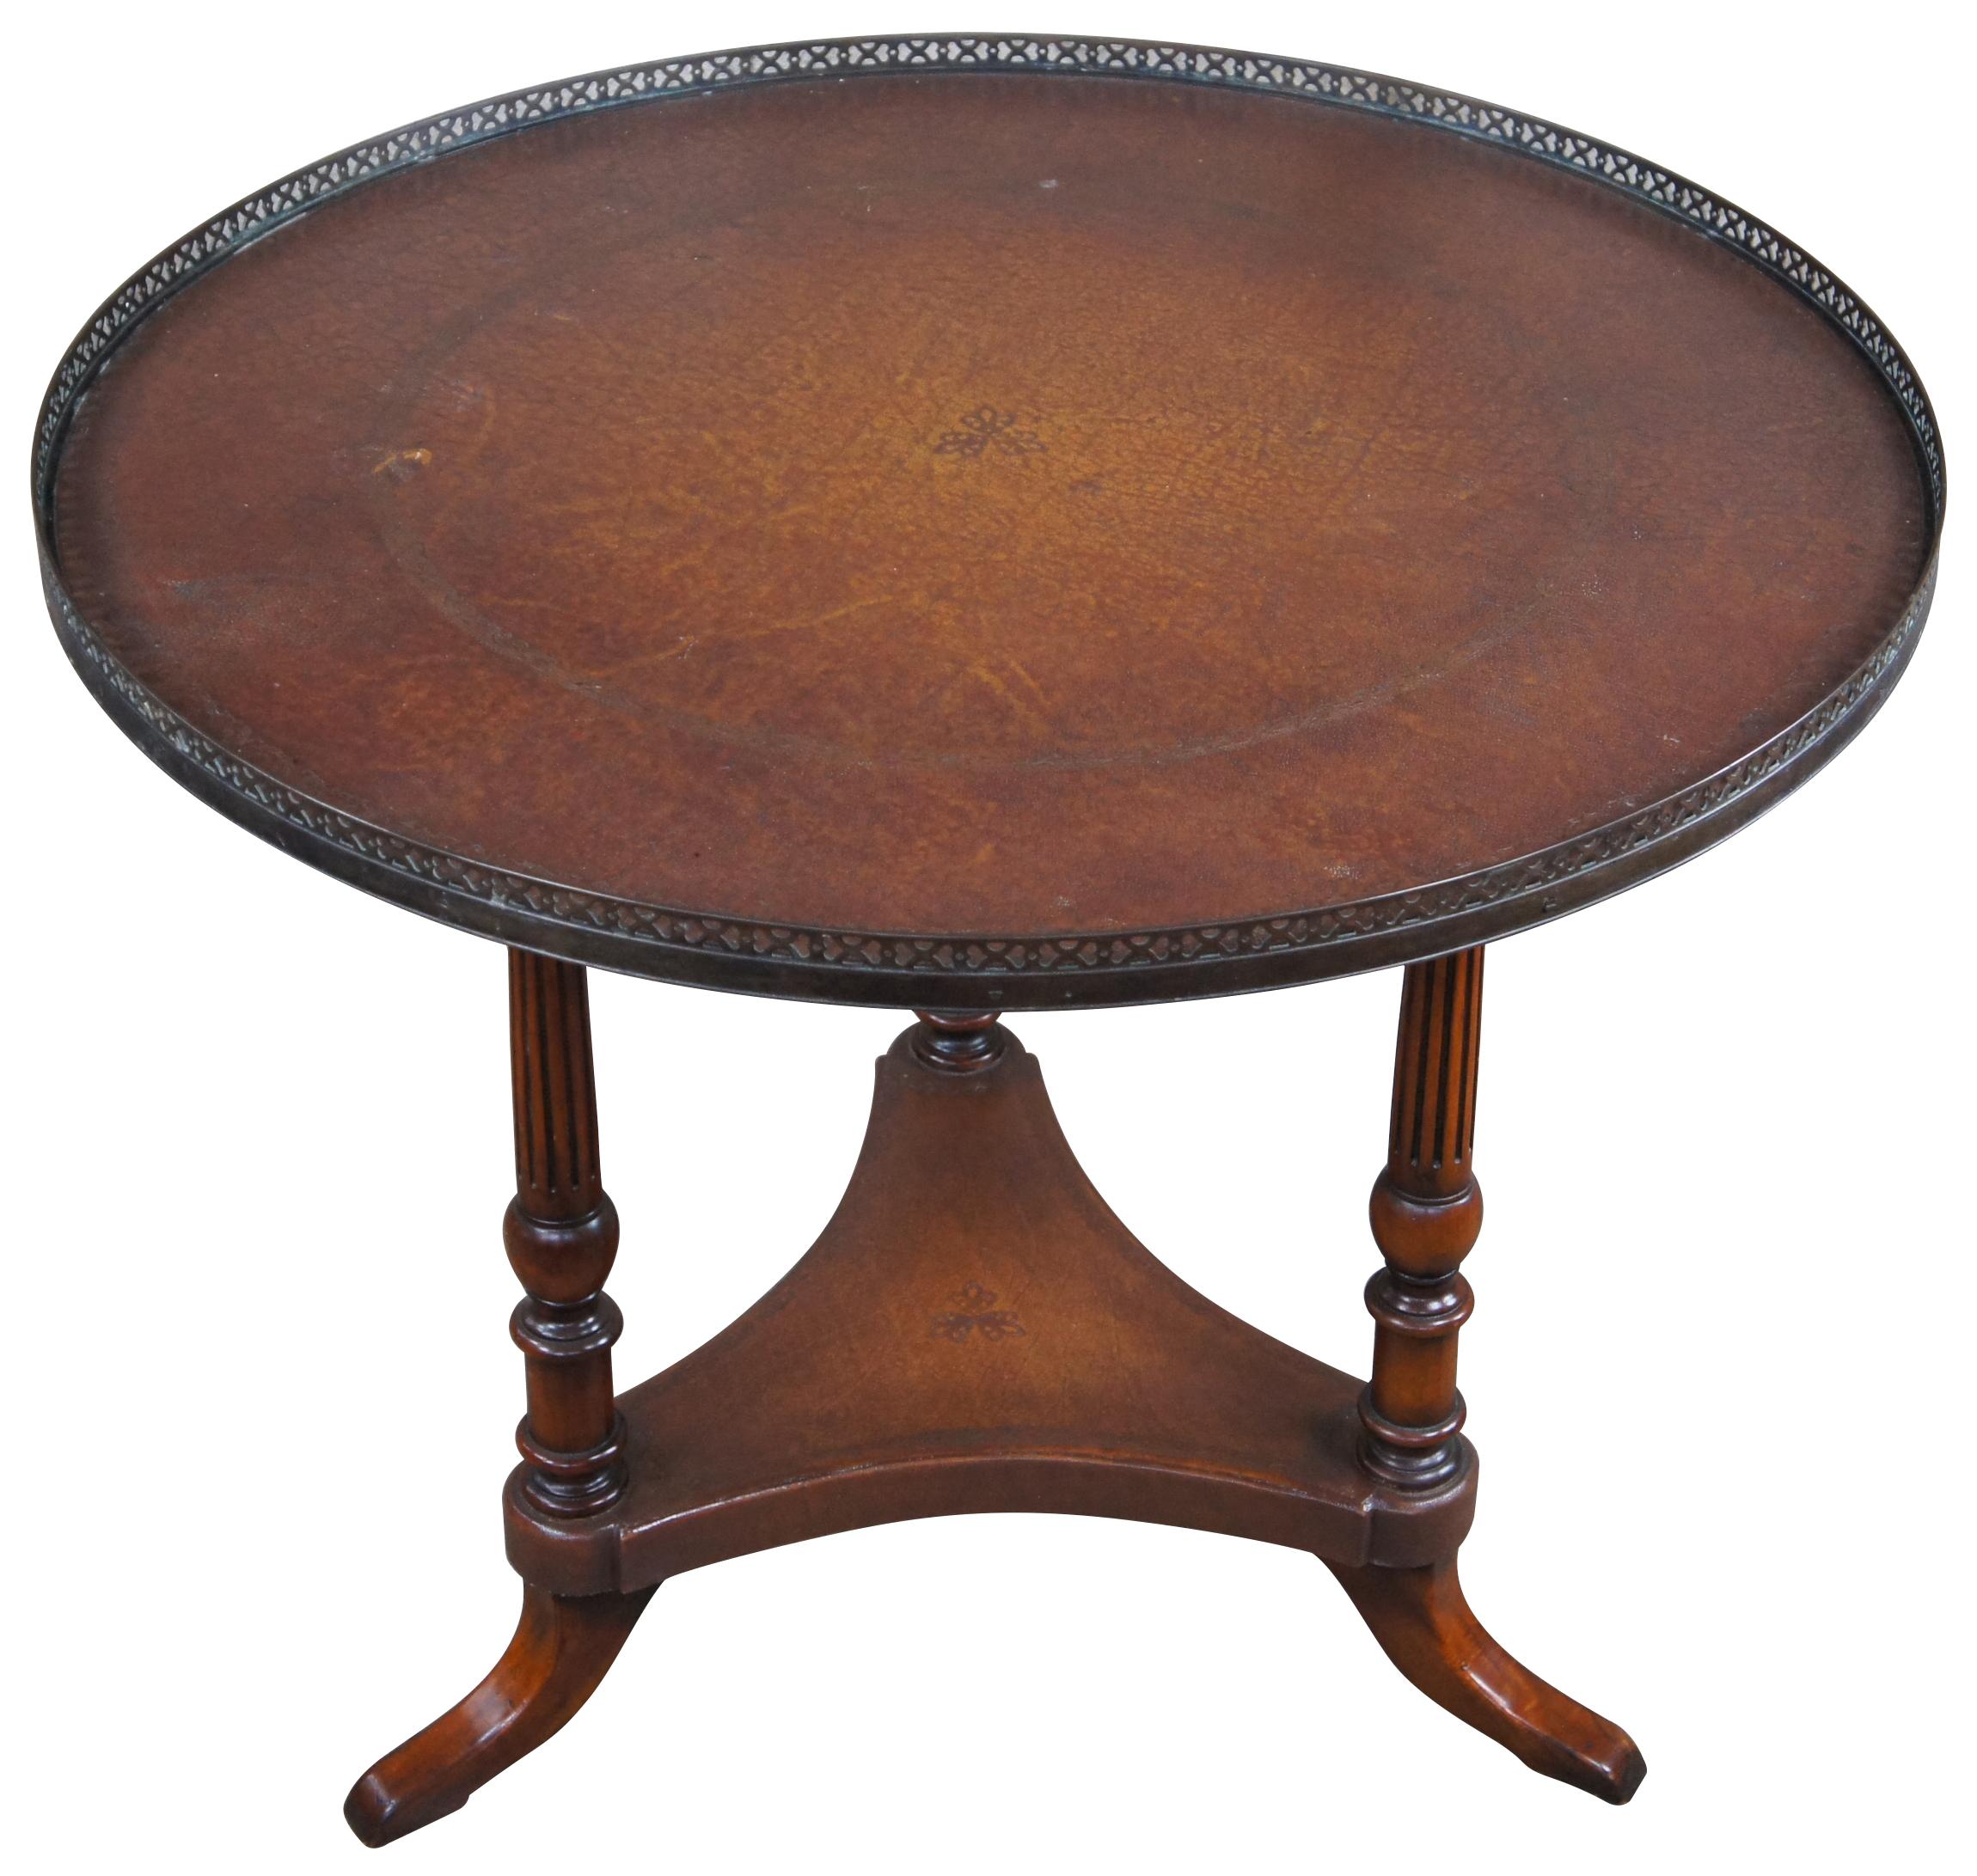 Theodore Alexander tooled leather and mahogany center table. Drawing inspiration from Traditional and Sheraton styling. Features a round top with pierced brass gallery supported by turned and fluted columns with a tripod base. 
 